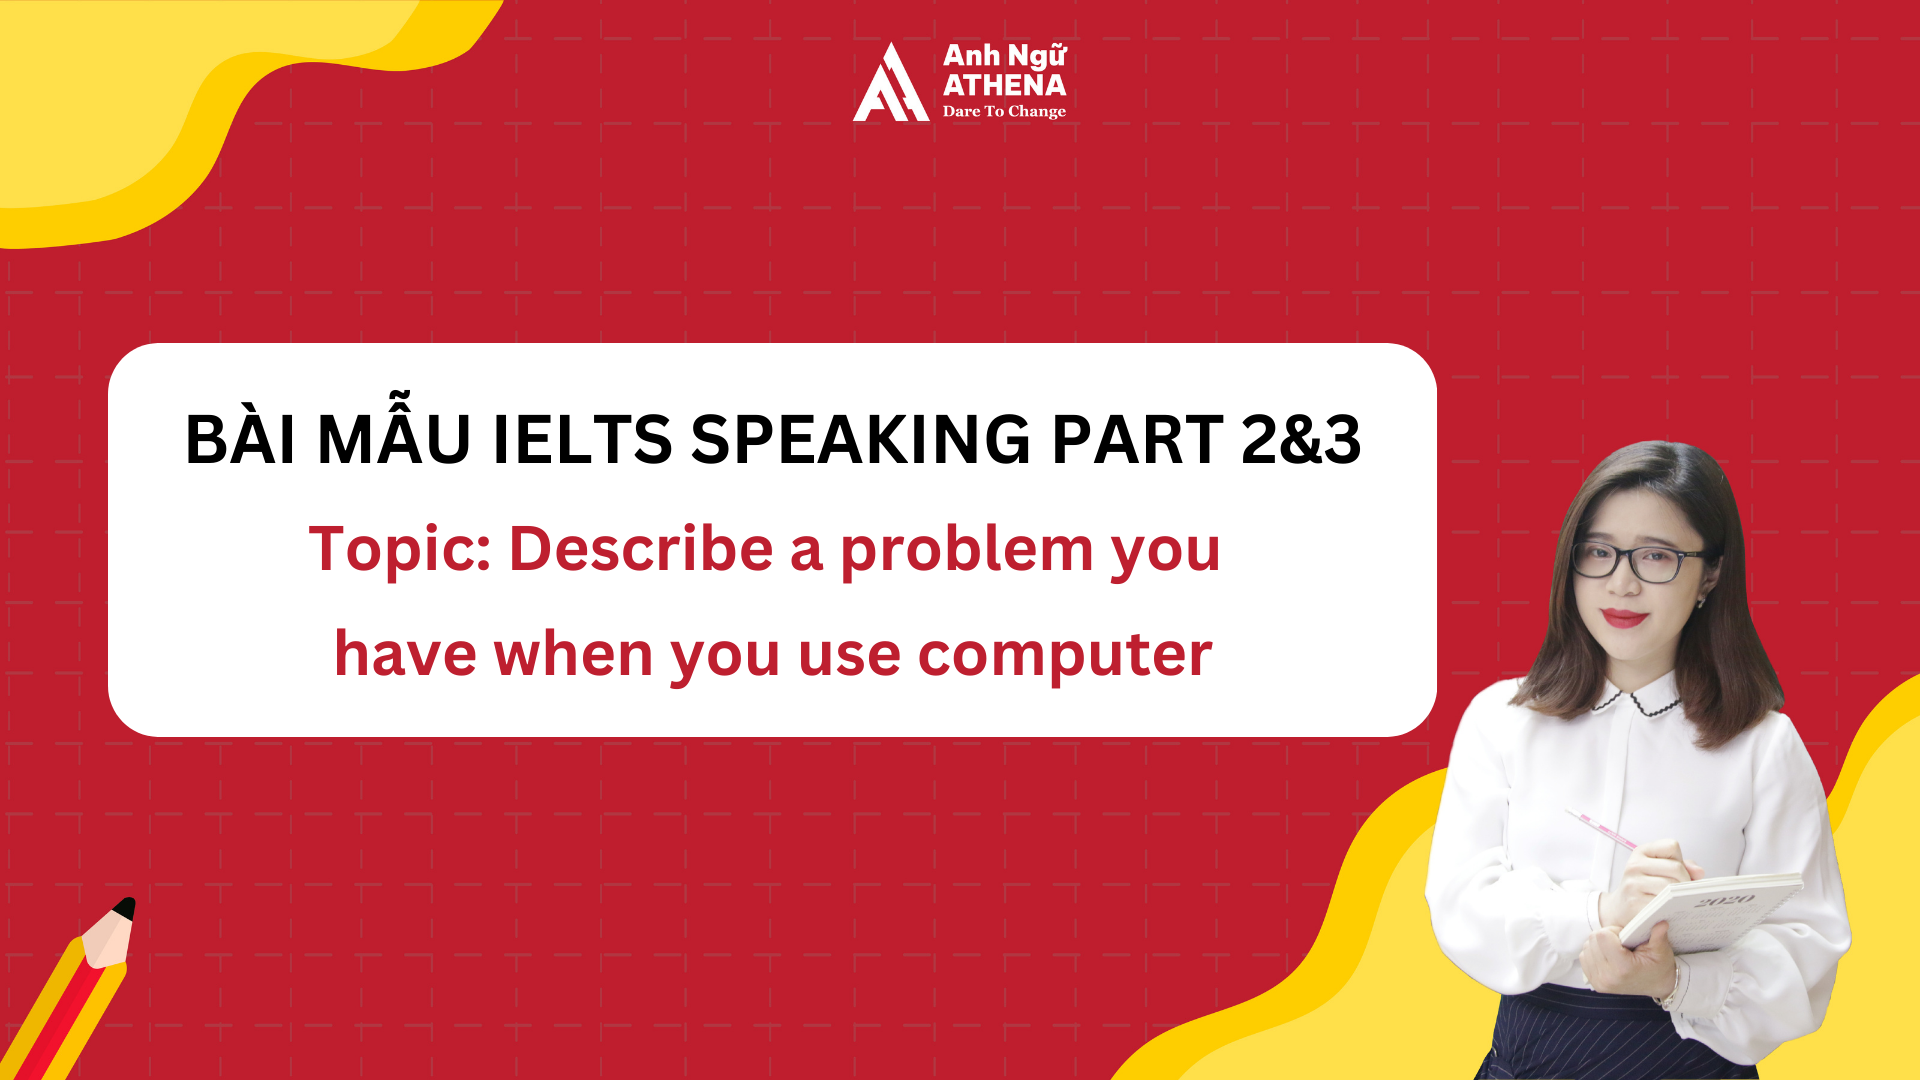 Bài mẫu IELTS Speaking Part 2 & 3 - Topic: Describe a problem you have when you use computer